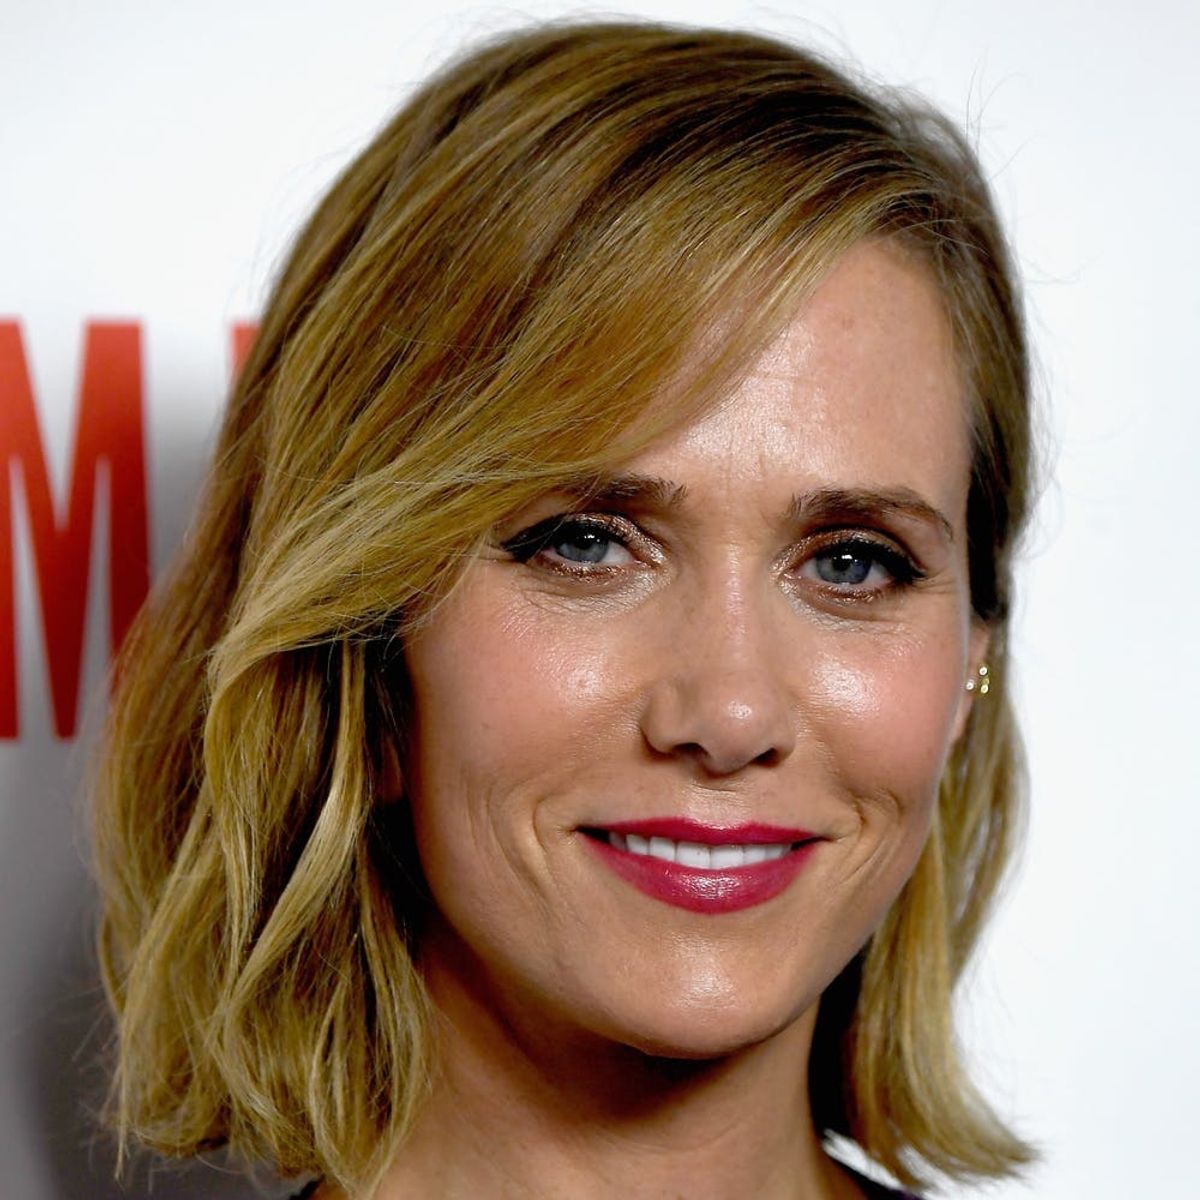 Kristen Wiig Is Doing the Impossible and Pulling Off a Bowl Cut